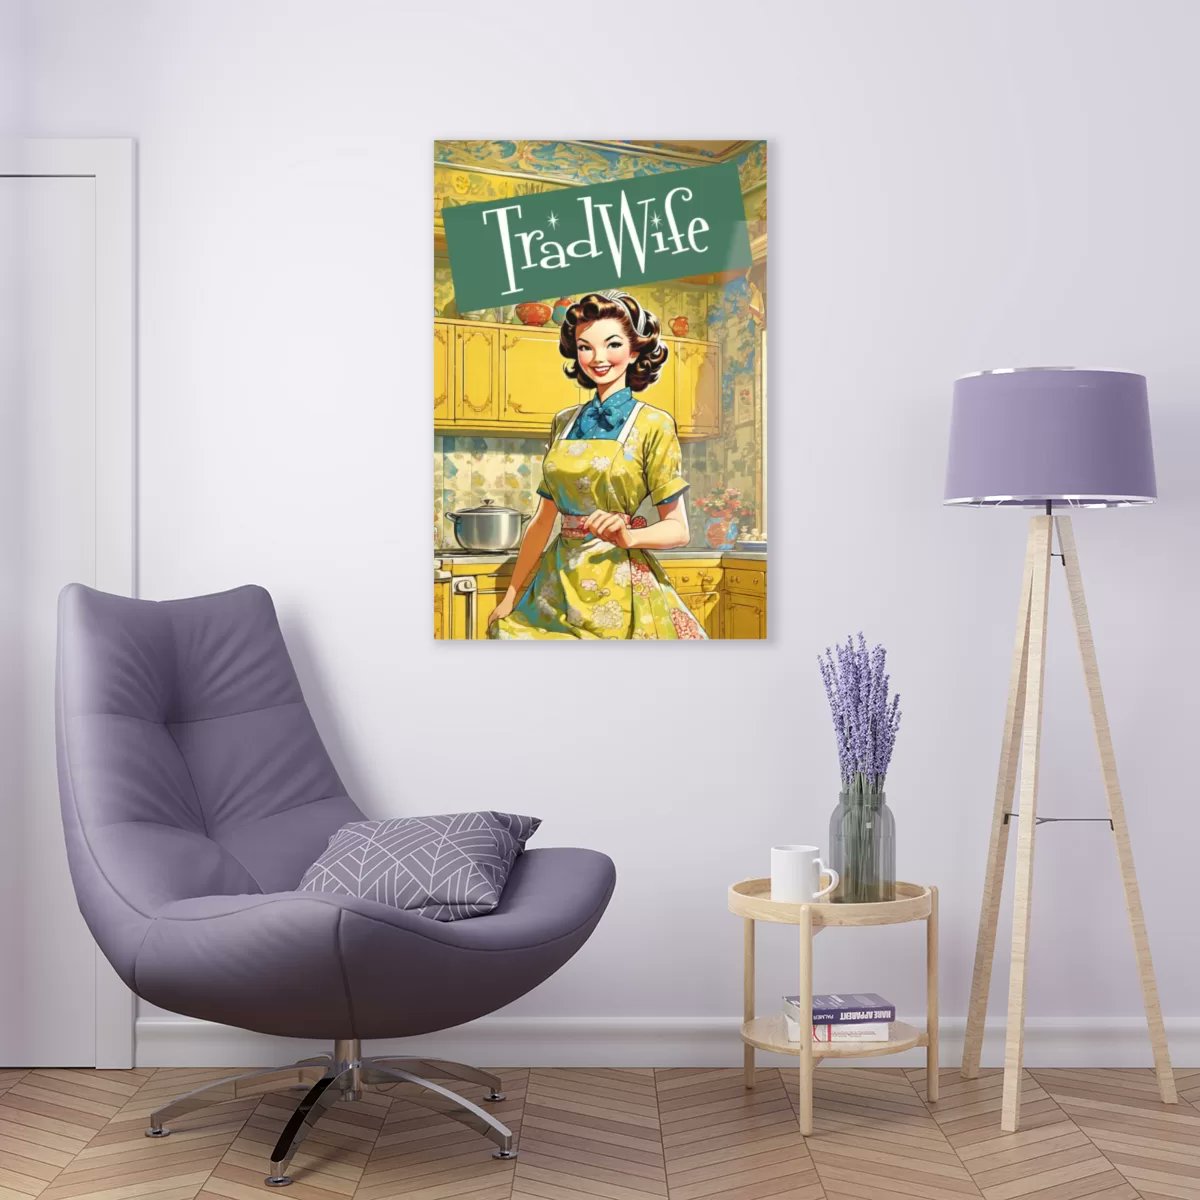 ✨ Celebrate traditional femininity with our TradWife Collection! Sip from mugs that echo strength, adorn your space with posters that radiate grace, and wear empowerment with our T-shirts.🌷💫 #CelebrateTradition #Tradwife

worthitorwoke.com/shop/